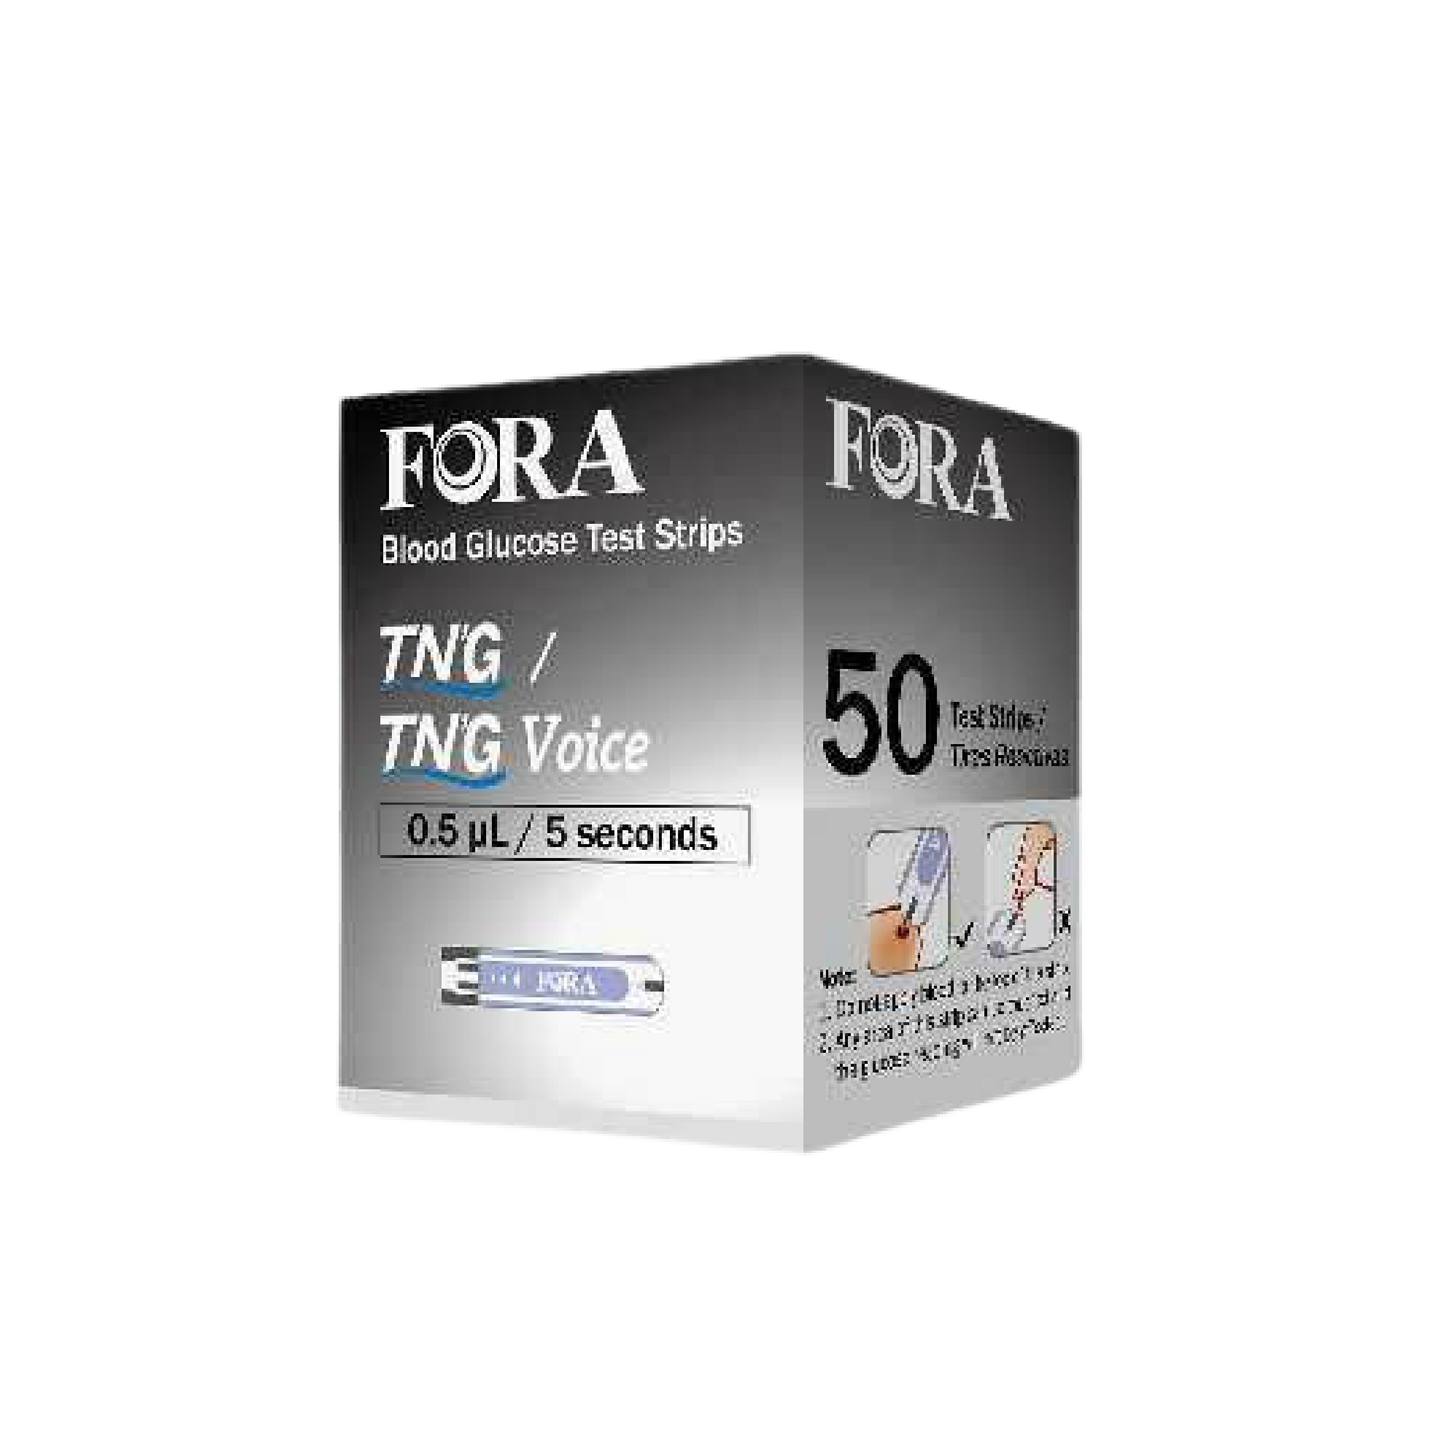 FORA TN'G Voice Blood Glucose Strips (50 count/vial, NOT compatible with FORA 6 Connect/Test N'Go Advance Meter)